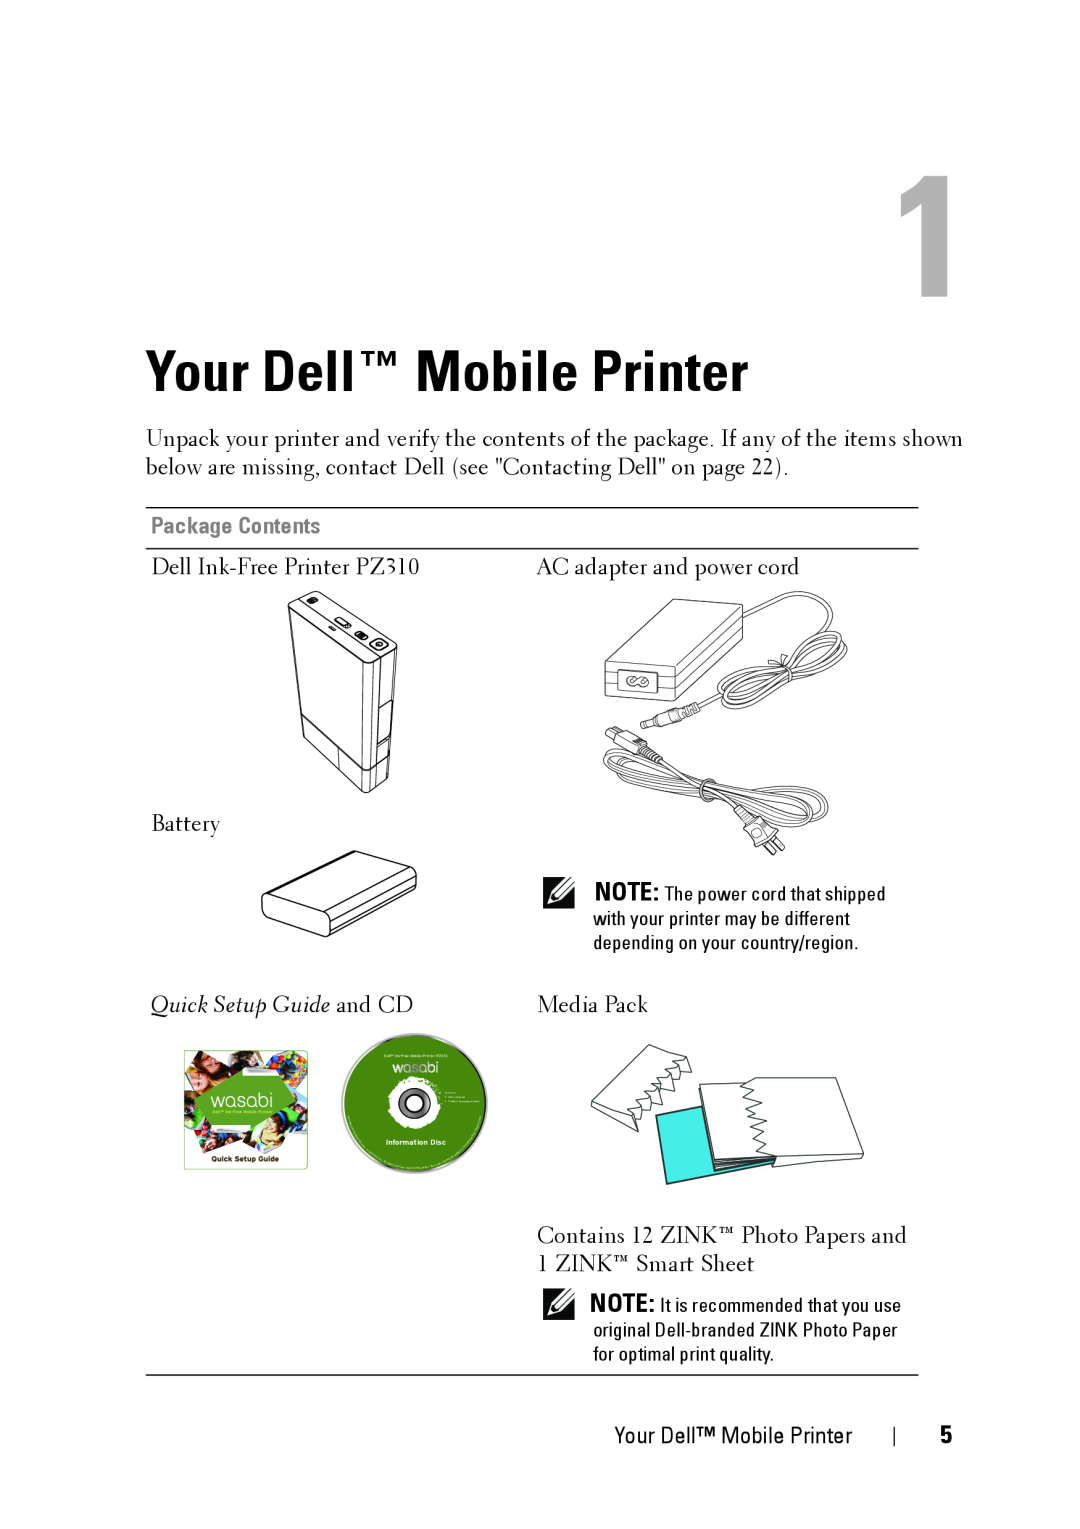 Dell PZ310 manual Your Dell Mobile Printer, Package Contents, Quick Setup Guide and CD, Media Pack 